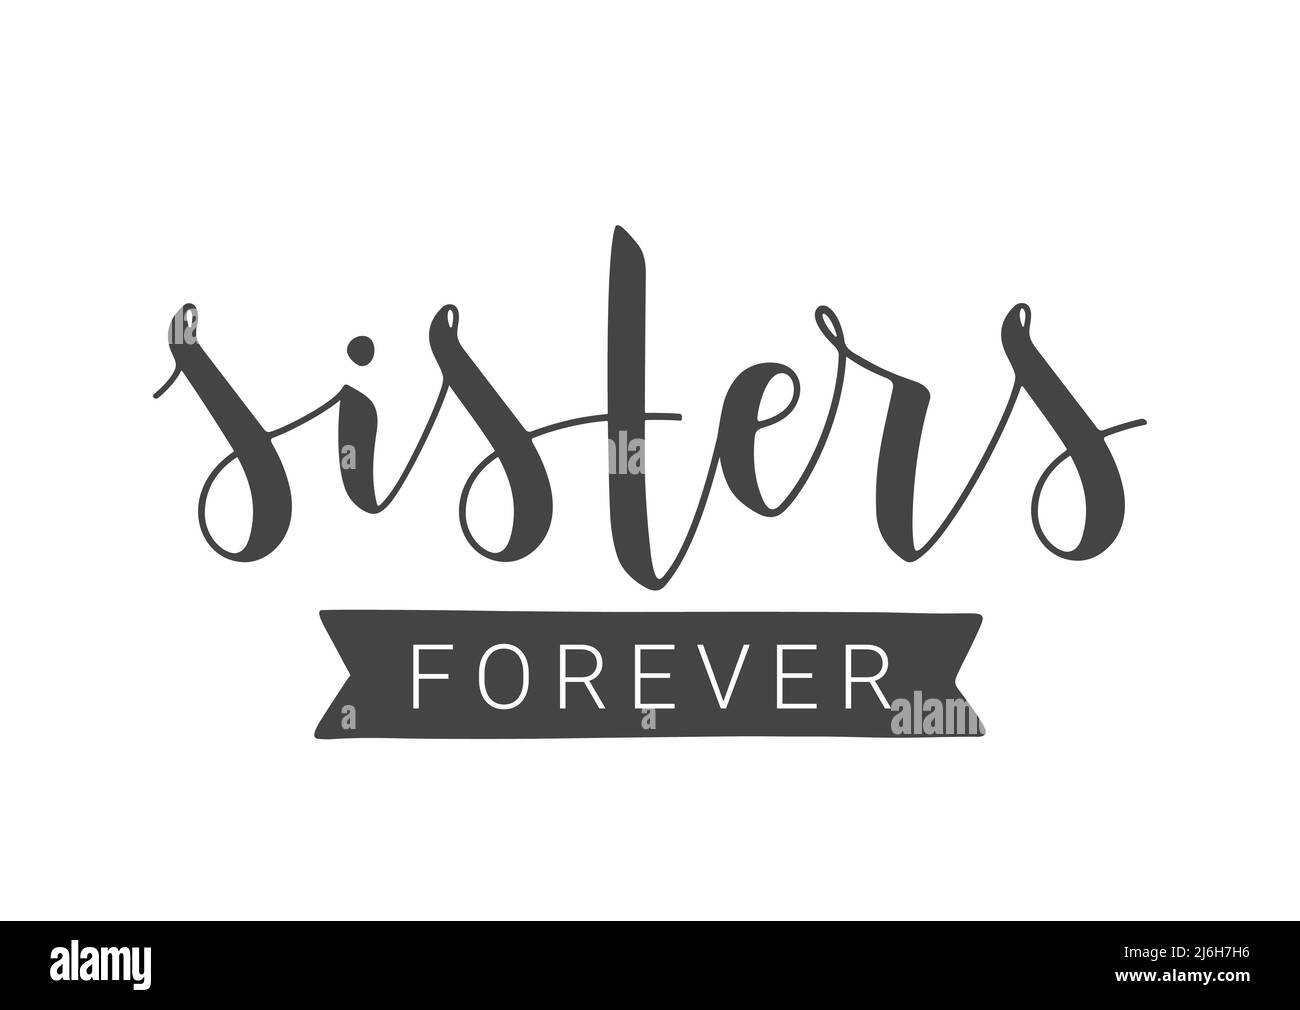 Sisters forever Stock Vector Images - Alamy